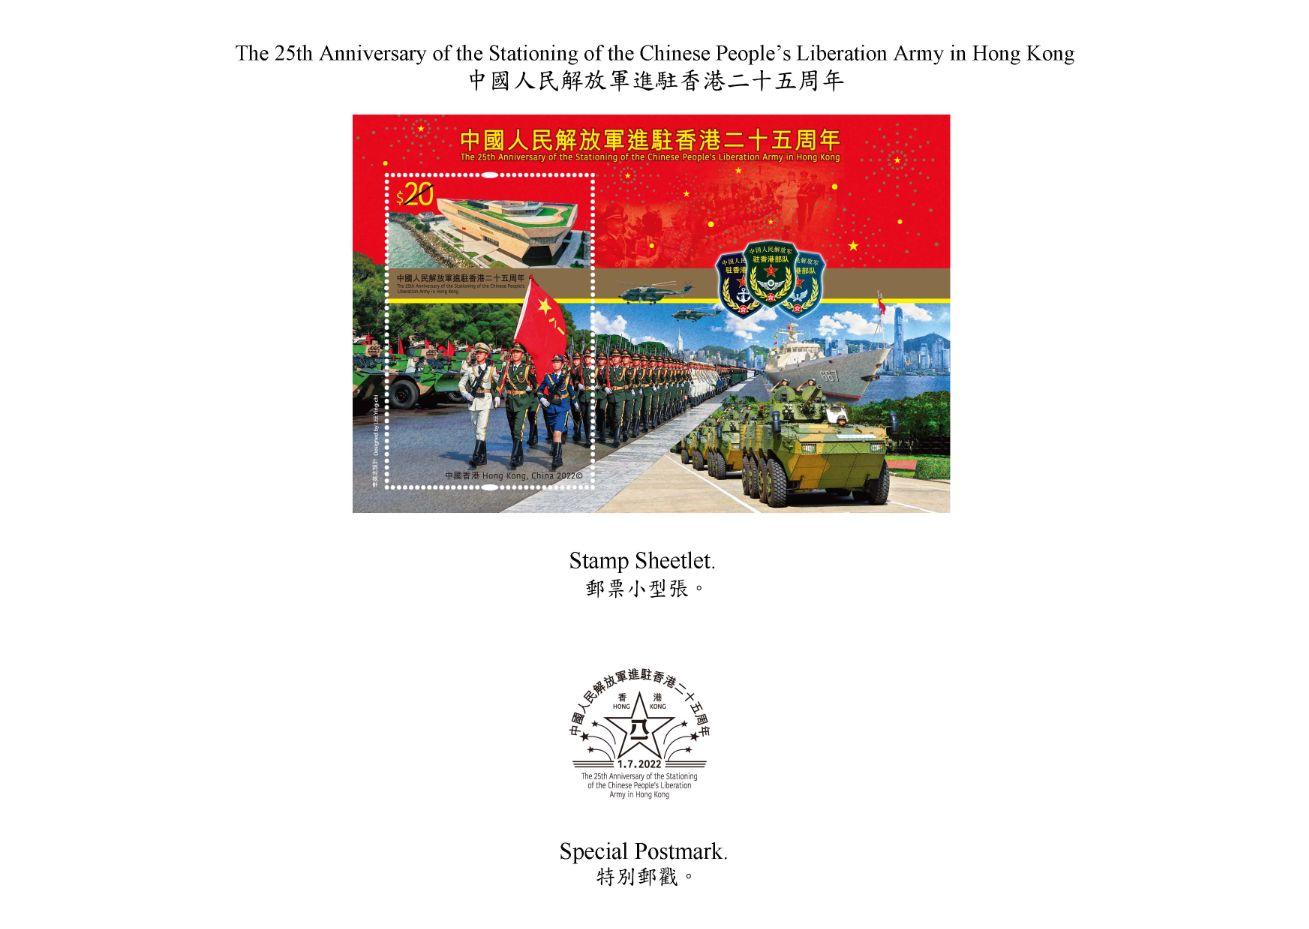 Hongkong Post will launch a commemorative stamp issue and associated philatelic products on the theme of "The 25th Anniversary of the Stationing of the Chinese People's Liberation Army in Hong Kong" on July 1 (Friday). Photo shows the stamp sheetlet and the special postmark.
